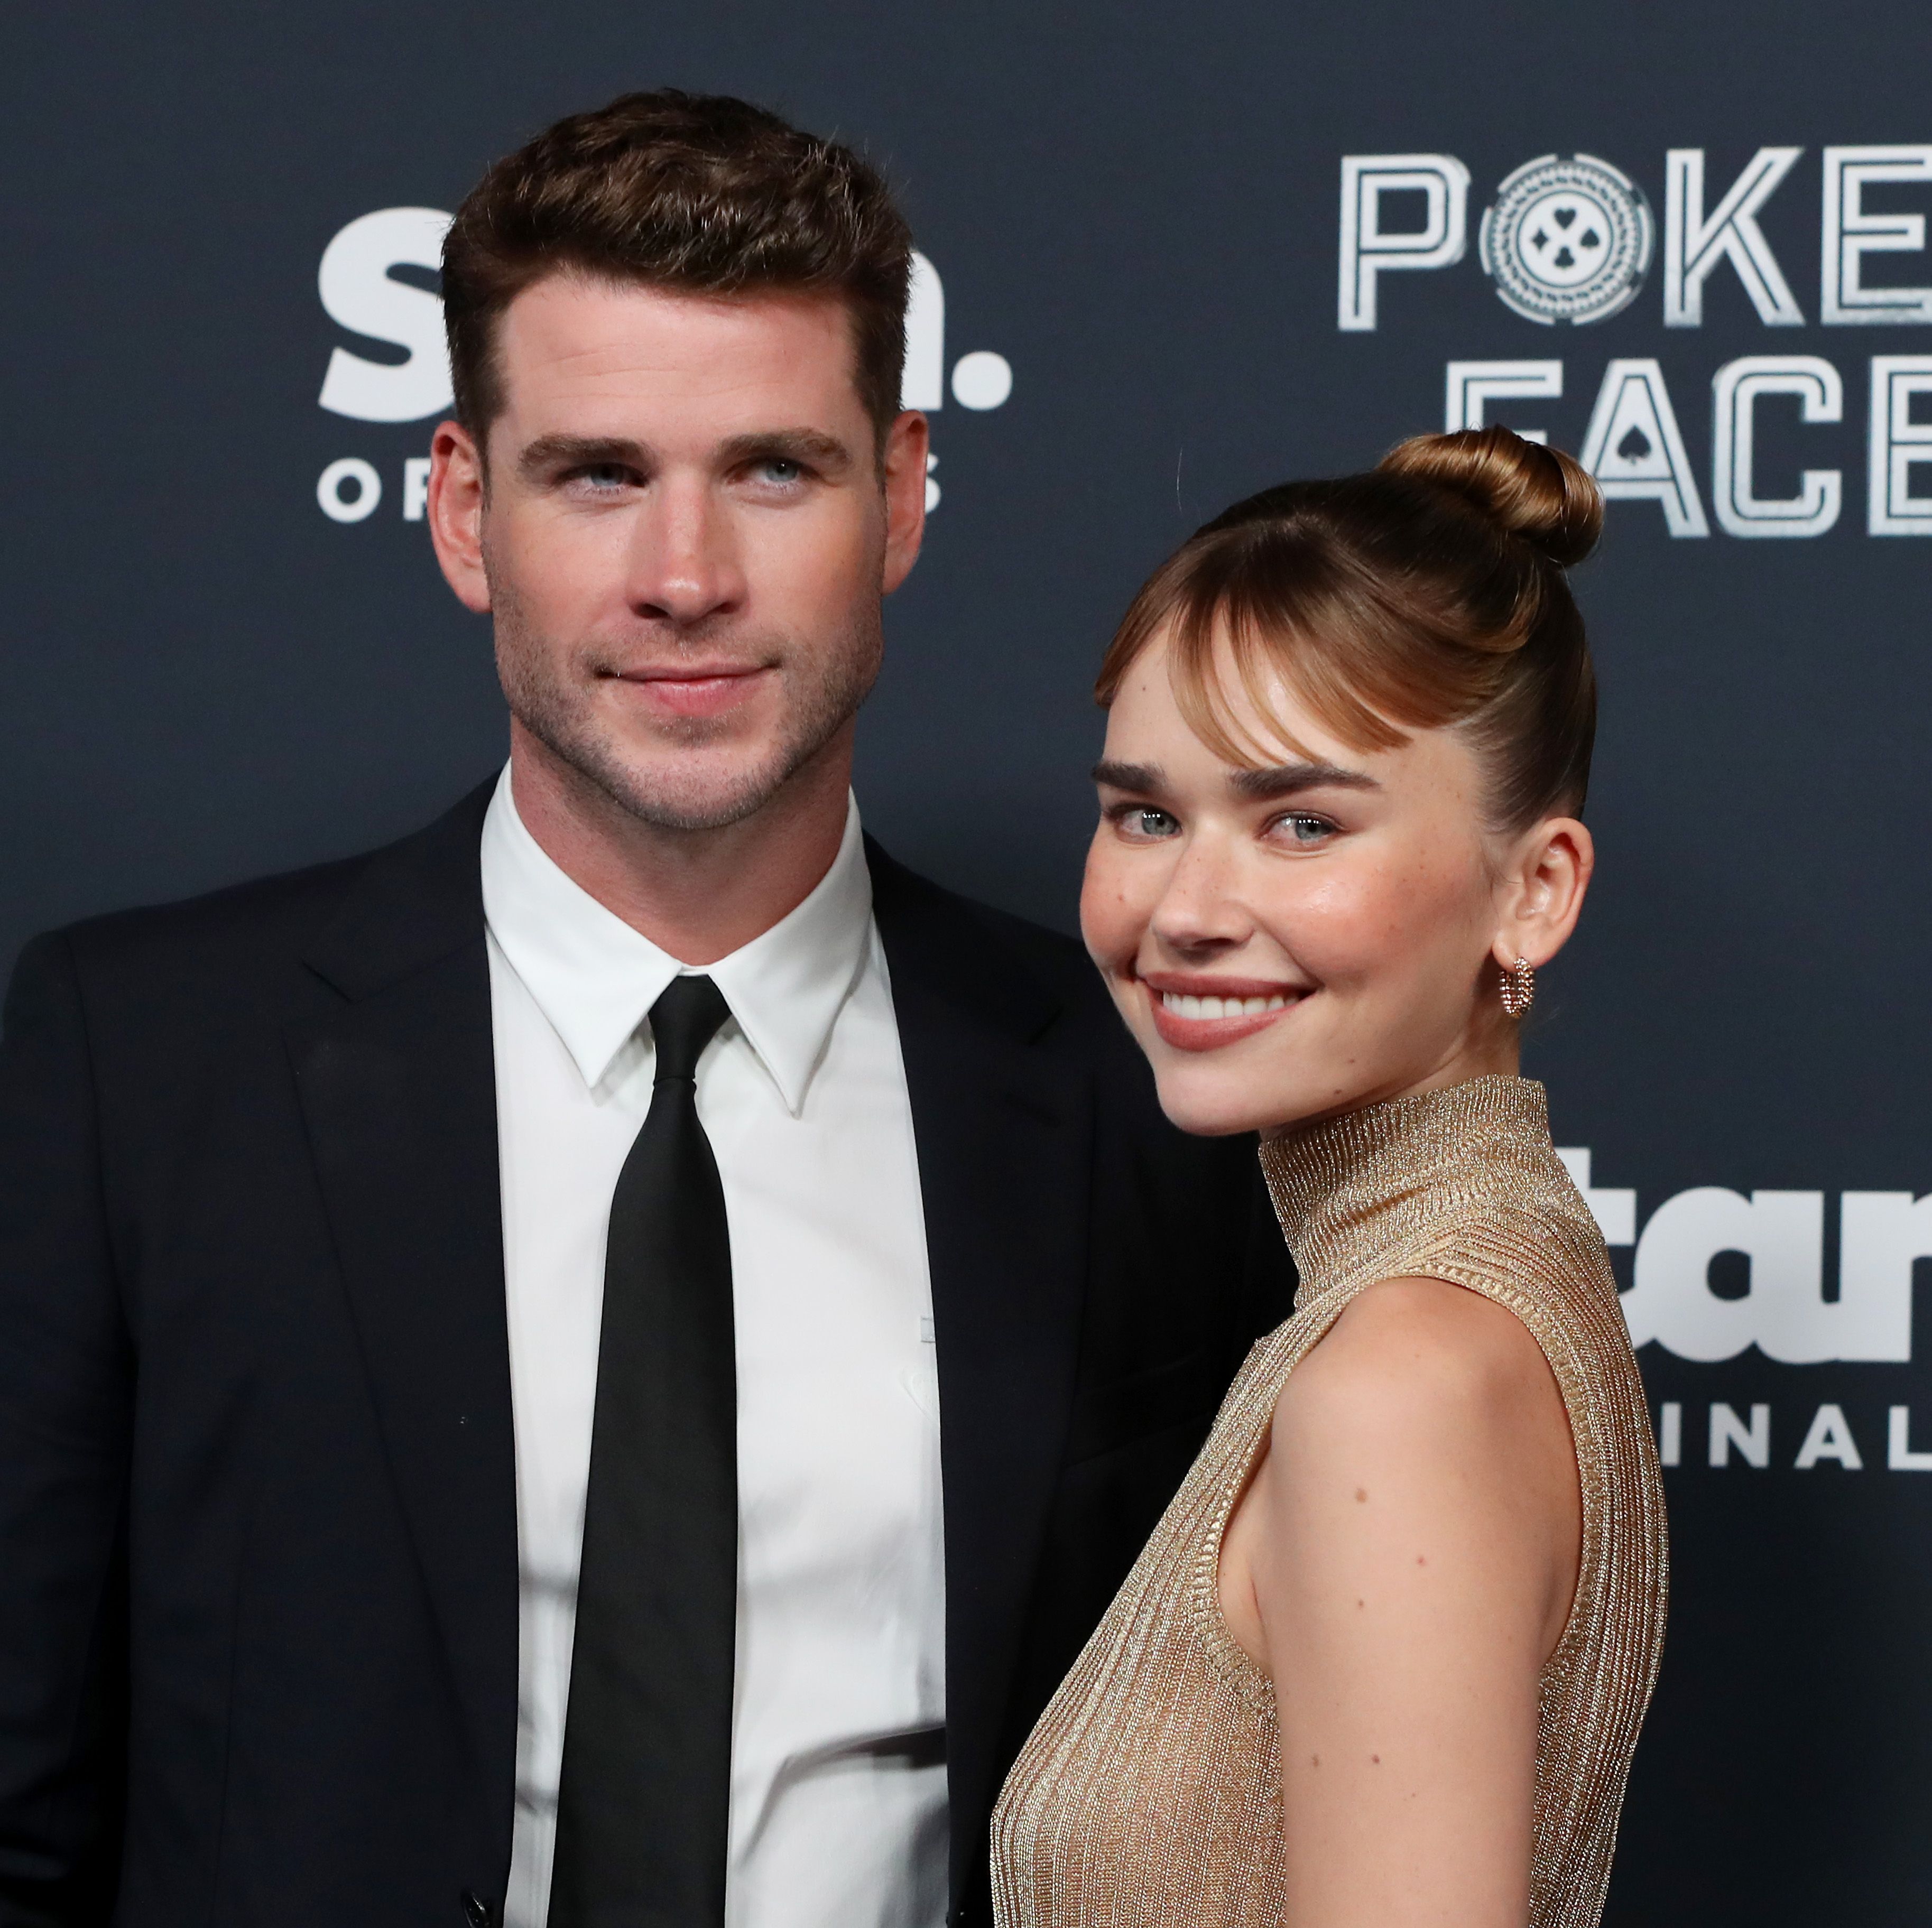 Liam Hemsworth Makes Red Carpet Debut with Gabriella Brooks After Breakup Rumors